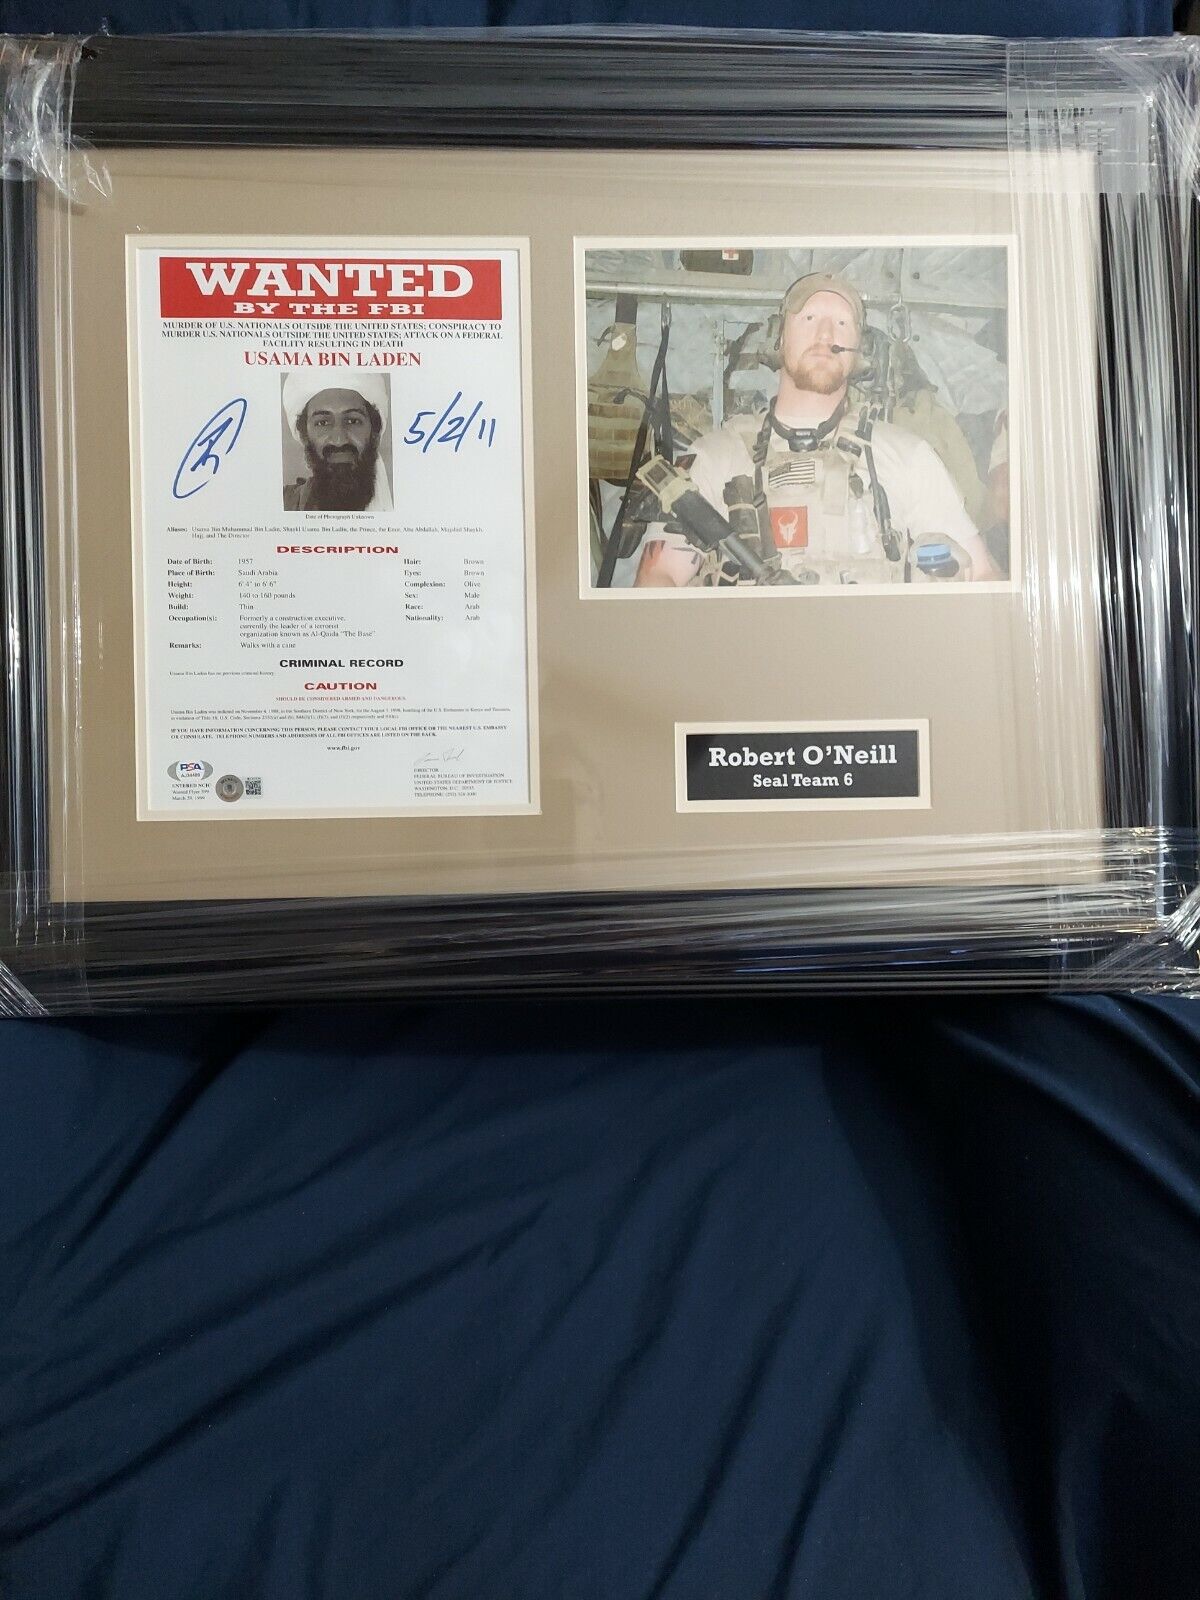 Robert O'Neill Signed Wanted Poster Framed And Matted PSA/DNA